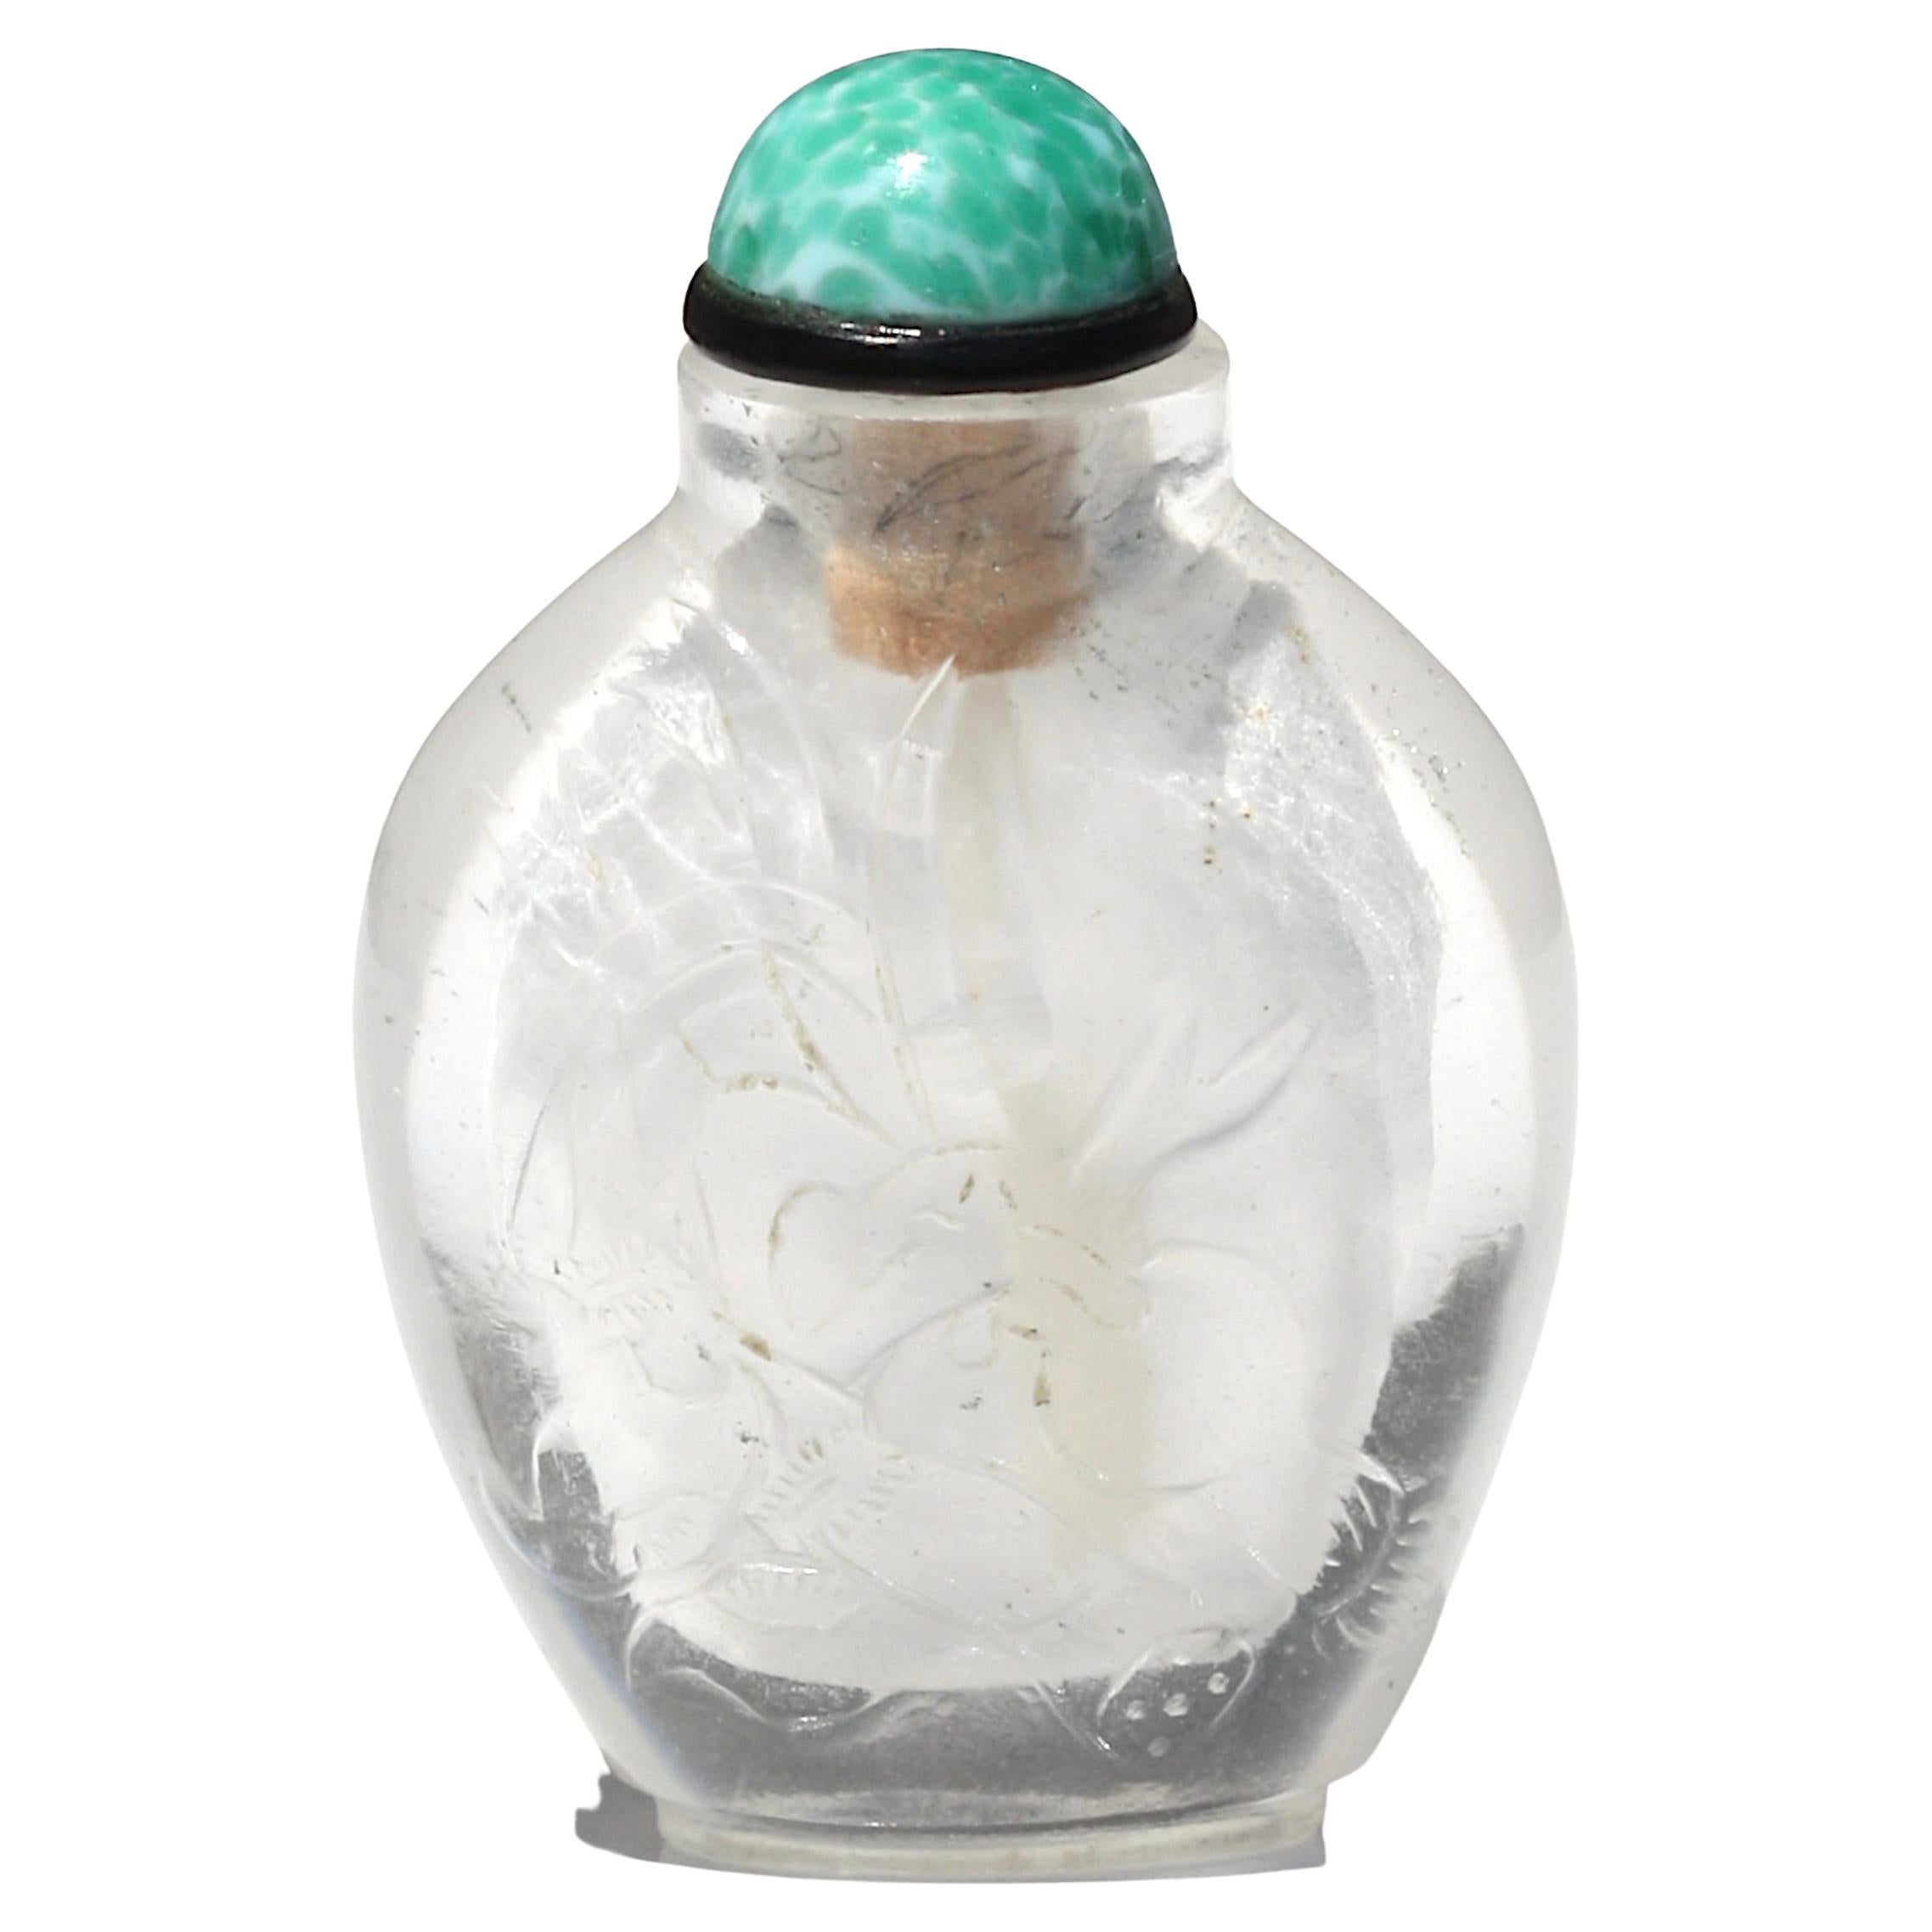 Chinese Rock Crystal "Ladies" Snuff Bottle Qing Dynasty, 19th Century